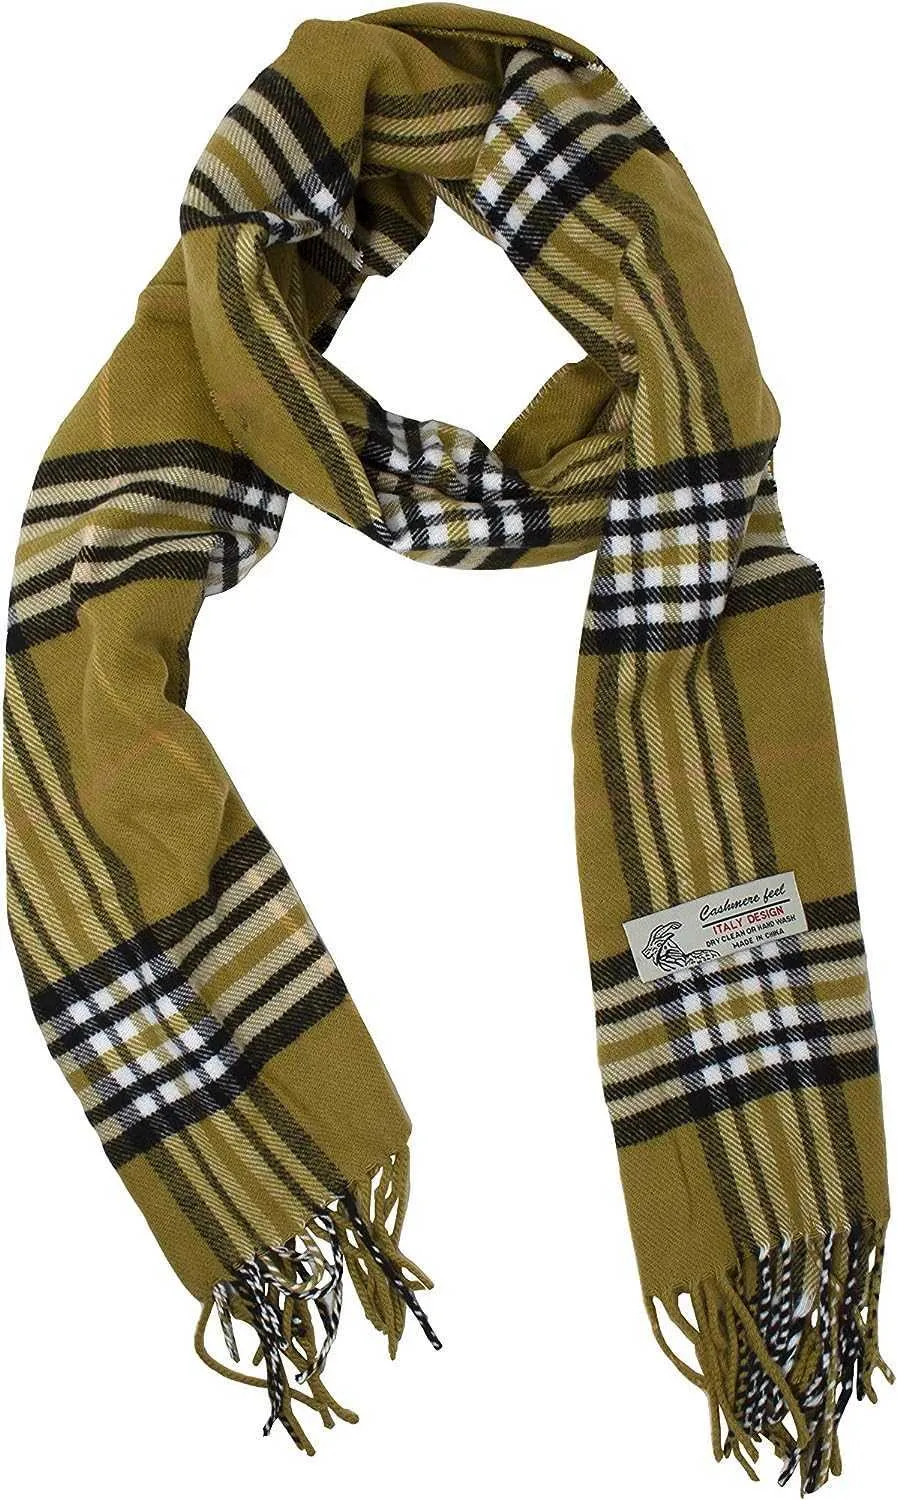 Scarves Women's Scarf Men's Soft Cashmere Touch Luxury Women's Scarf Gift Warm and Comfortable Shawl Super Soft and Comfortable All Day WearLF2030908